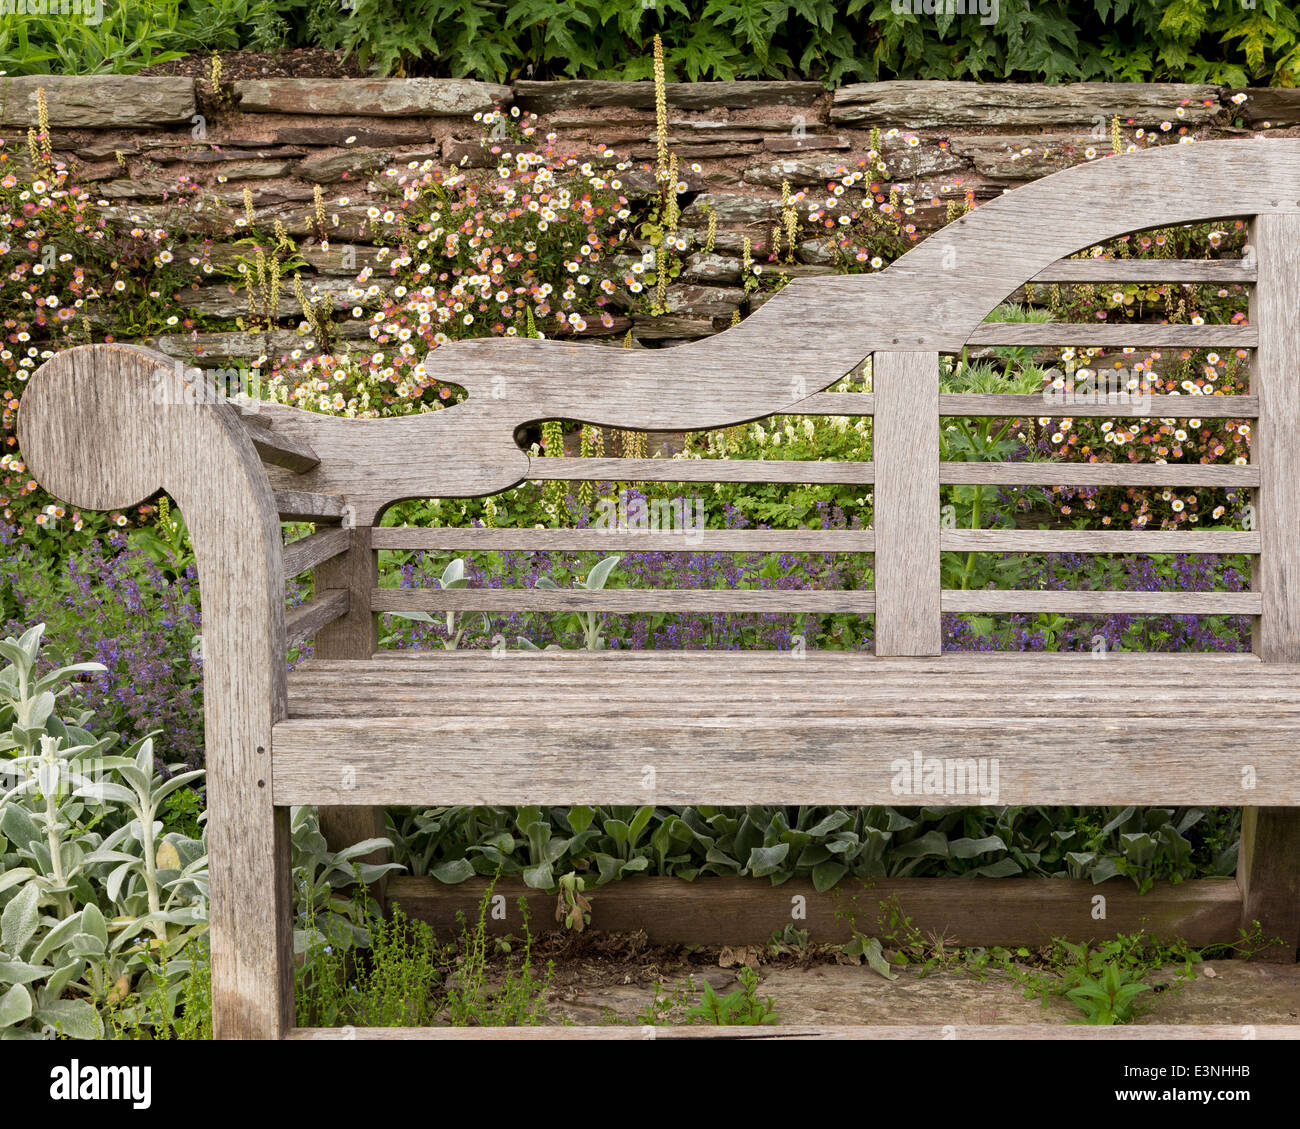 Ornate wooden garden bench in front of stone wall covered with daisies at  Hestercombe Gardens Stock Photo - Alamy